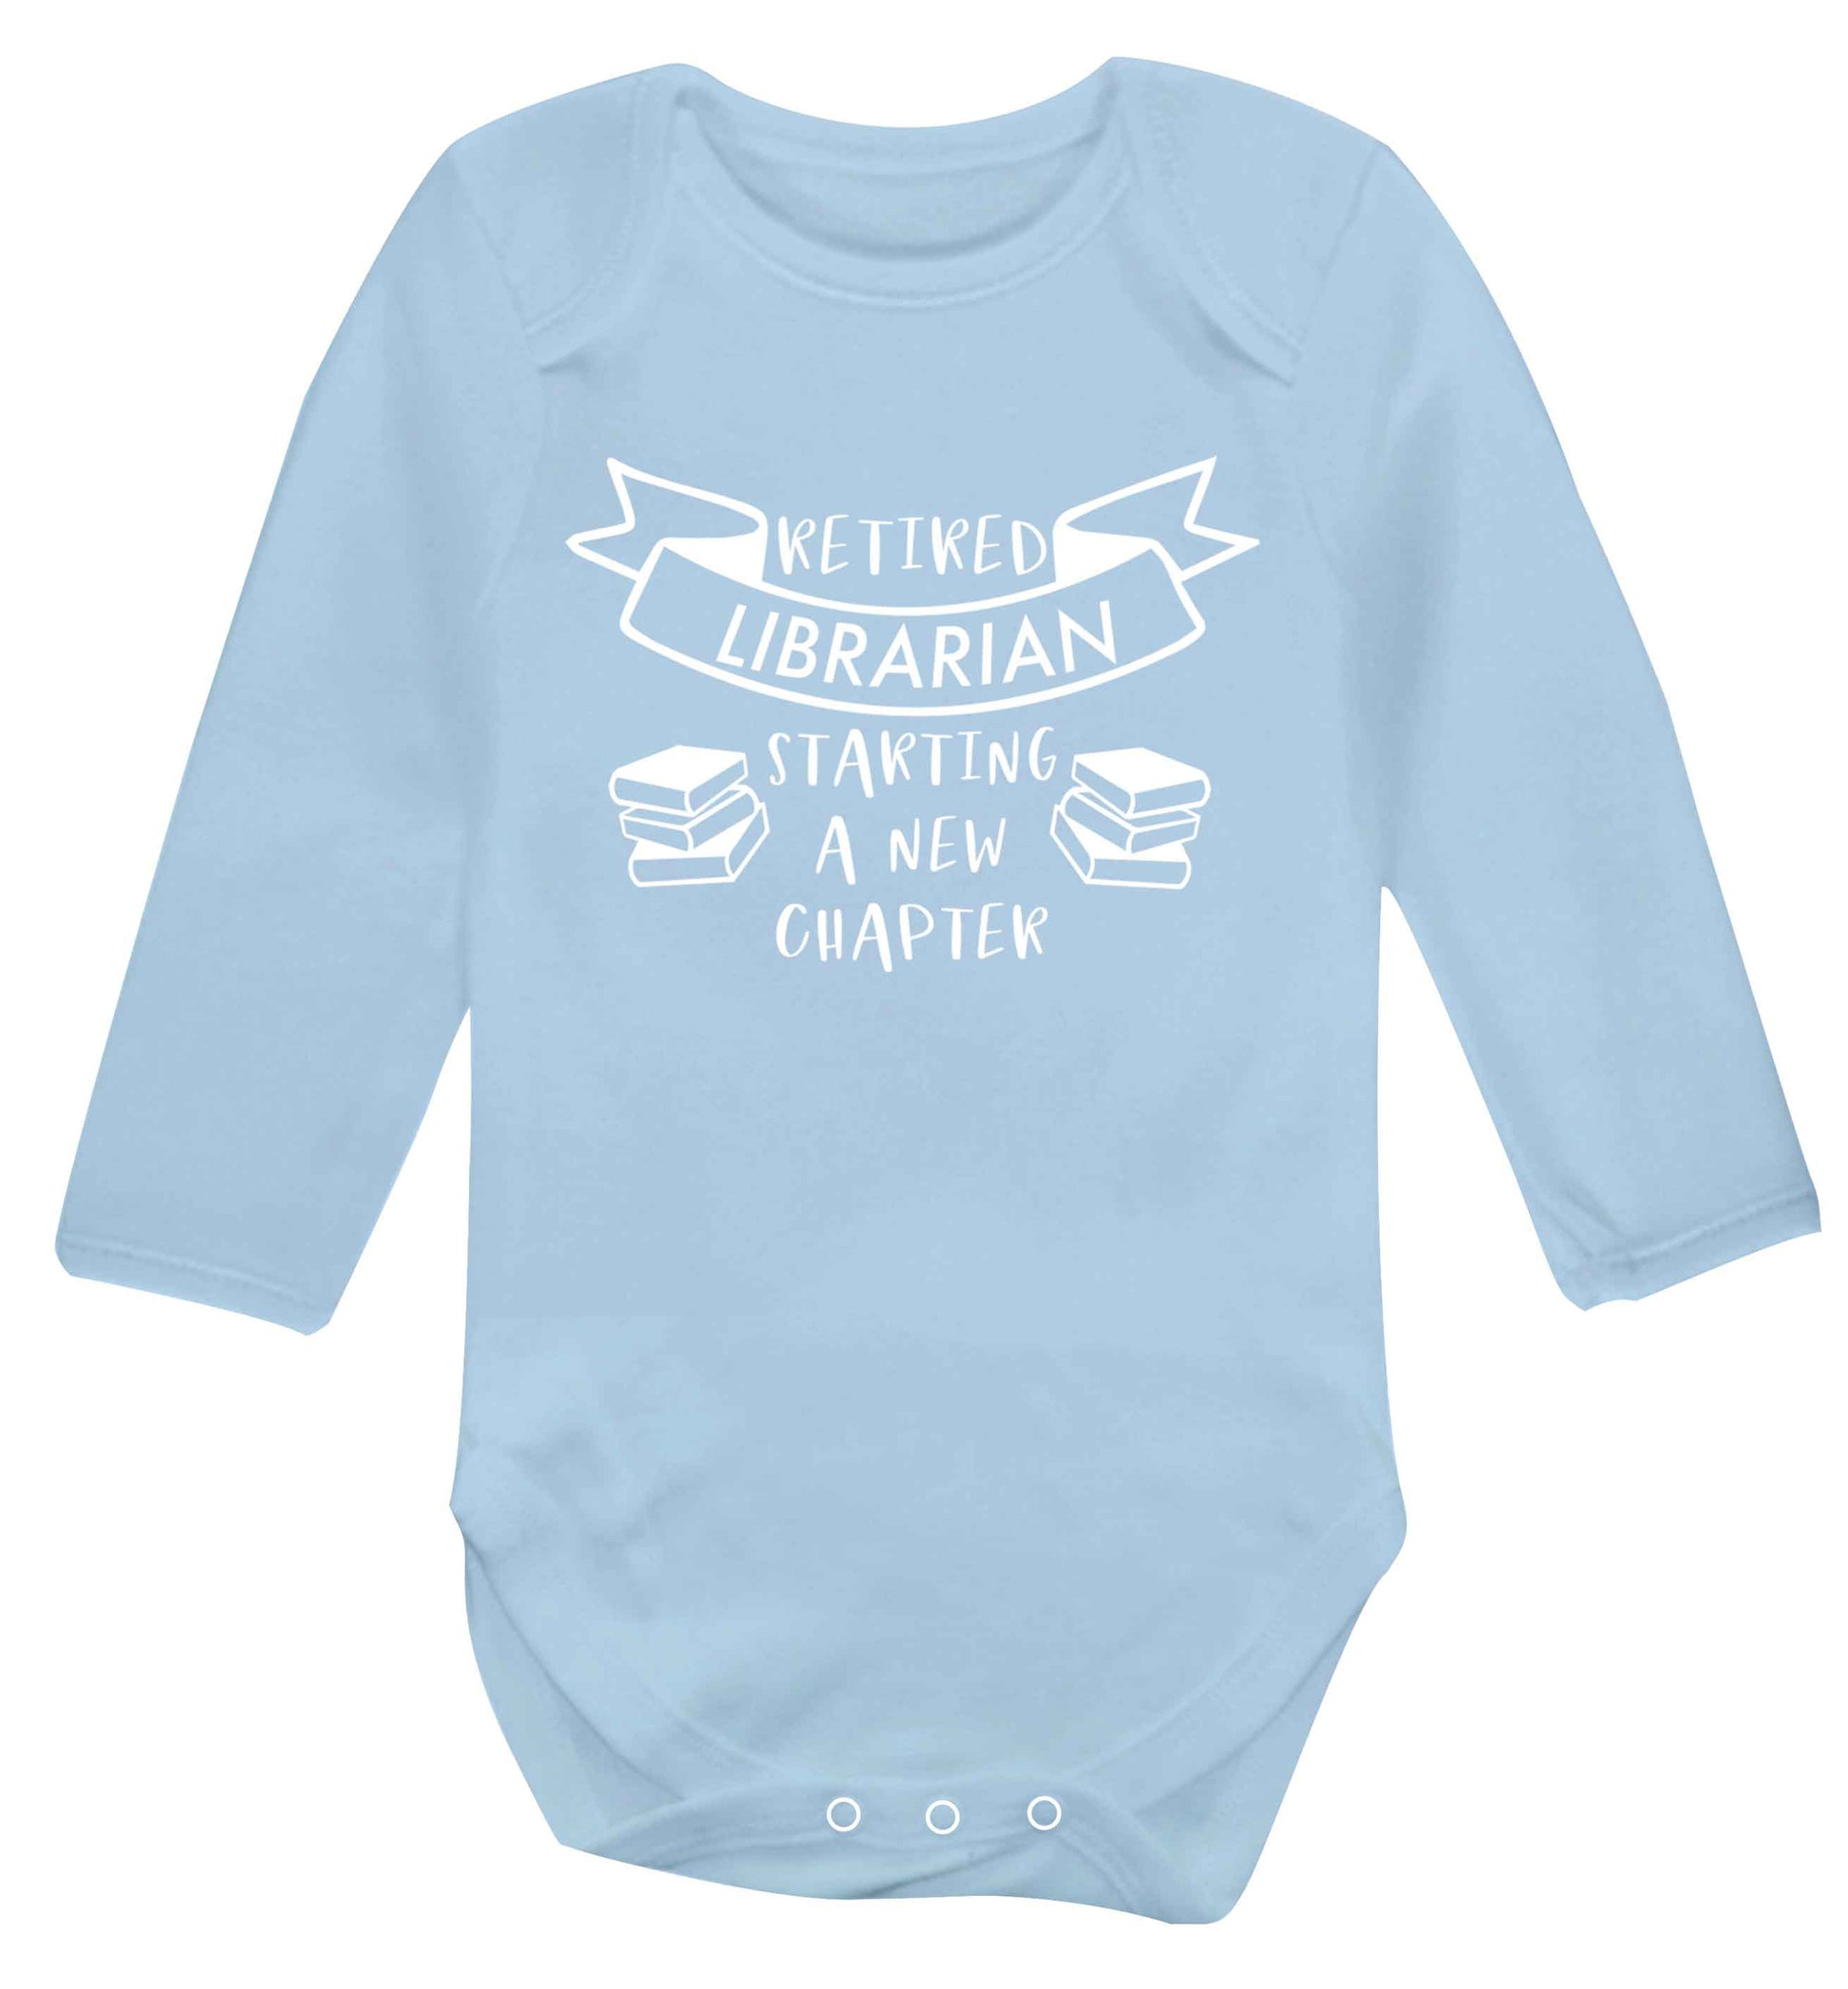 Retired librarian keep your hair on Baby Vest long sleeved pale blue 6-12 months